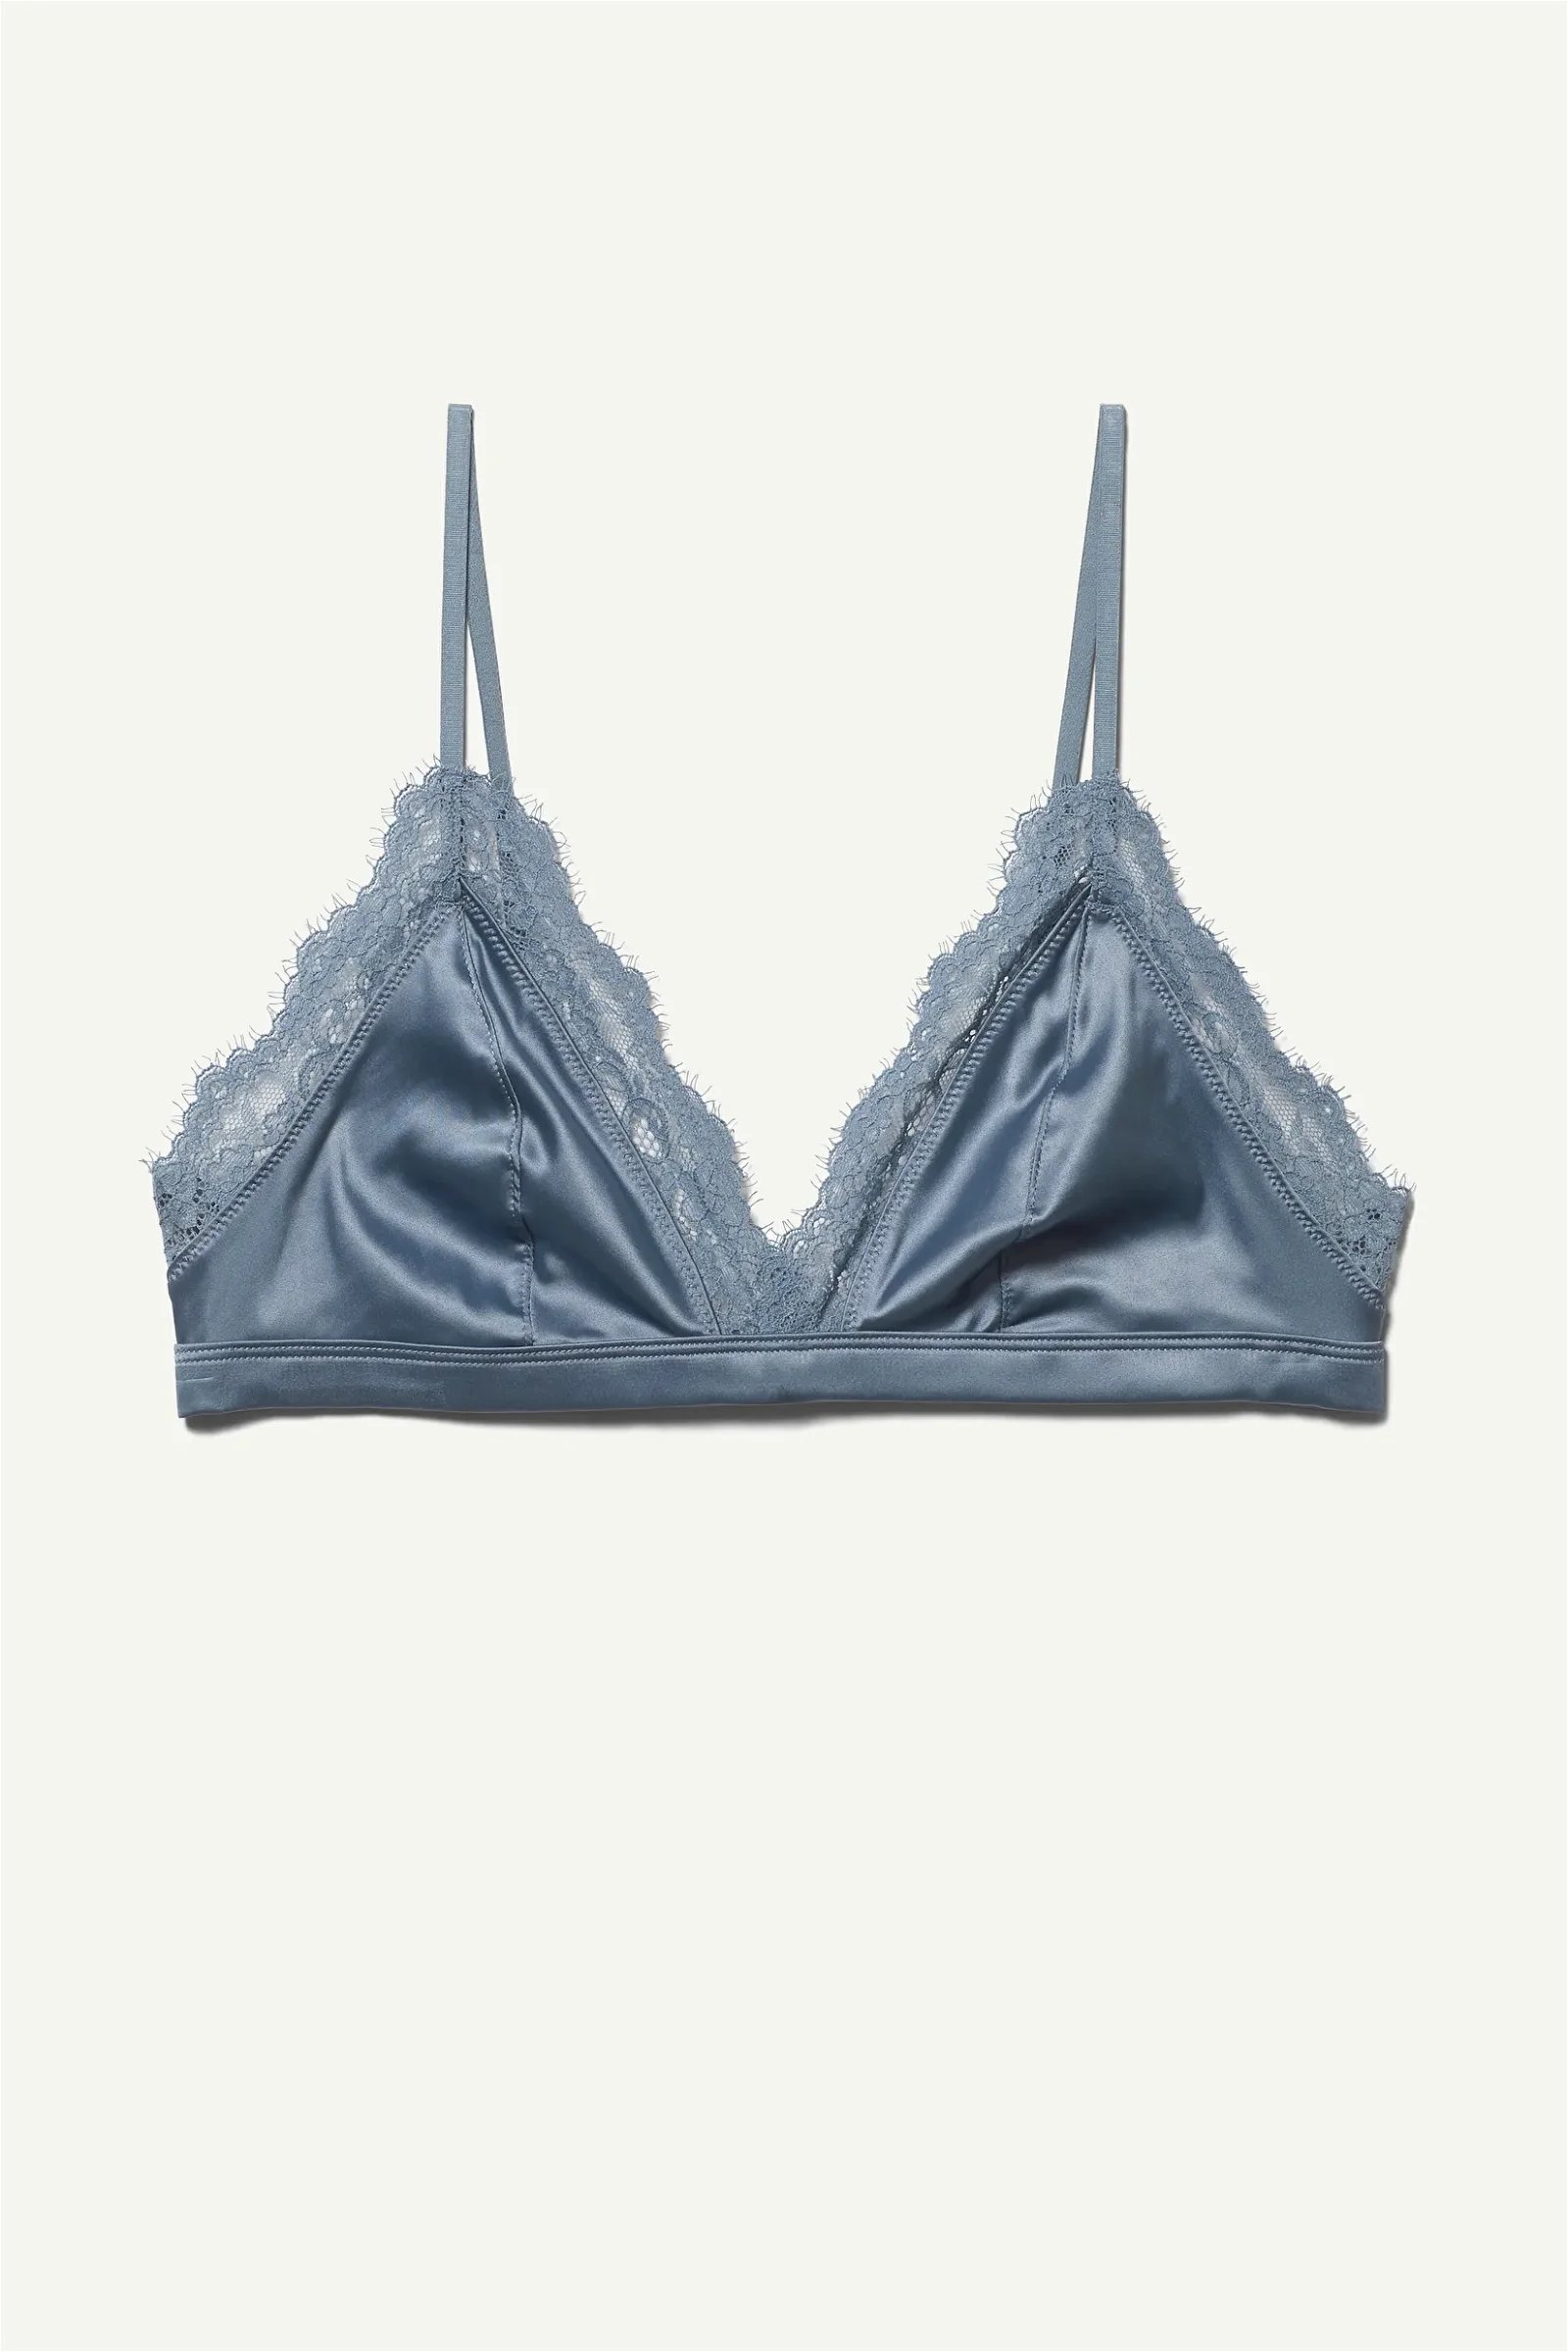 Calvin Klein Women's Obsess Lace Triangle Bralette - Large